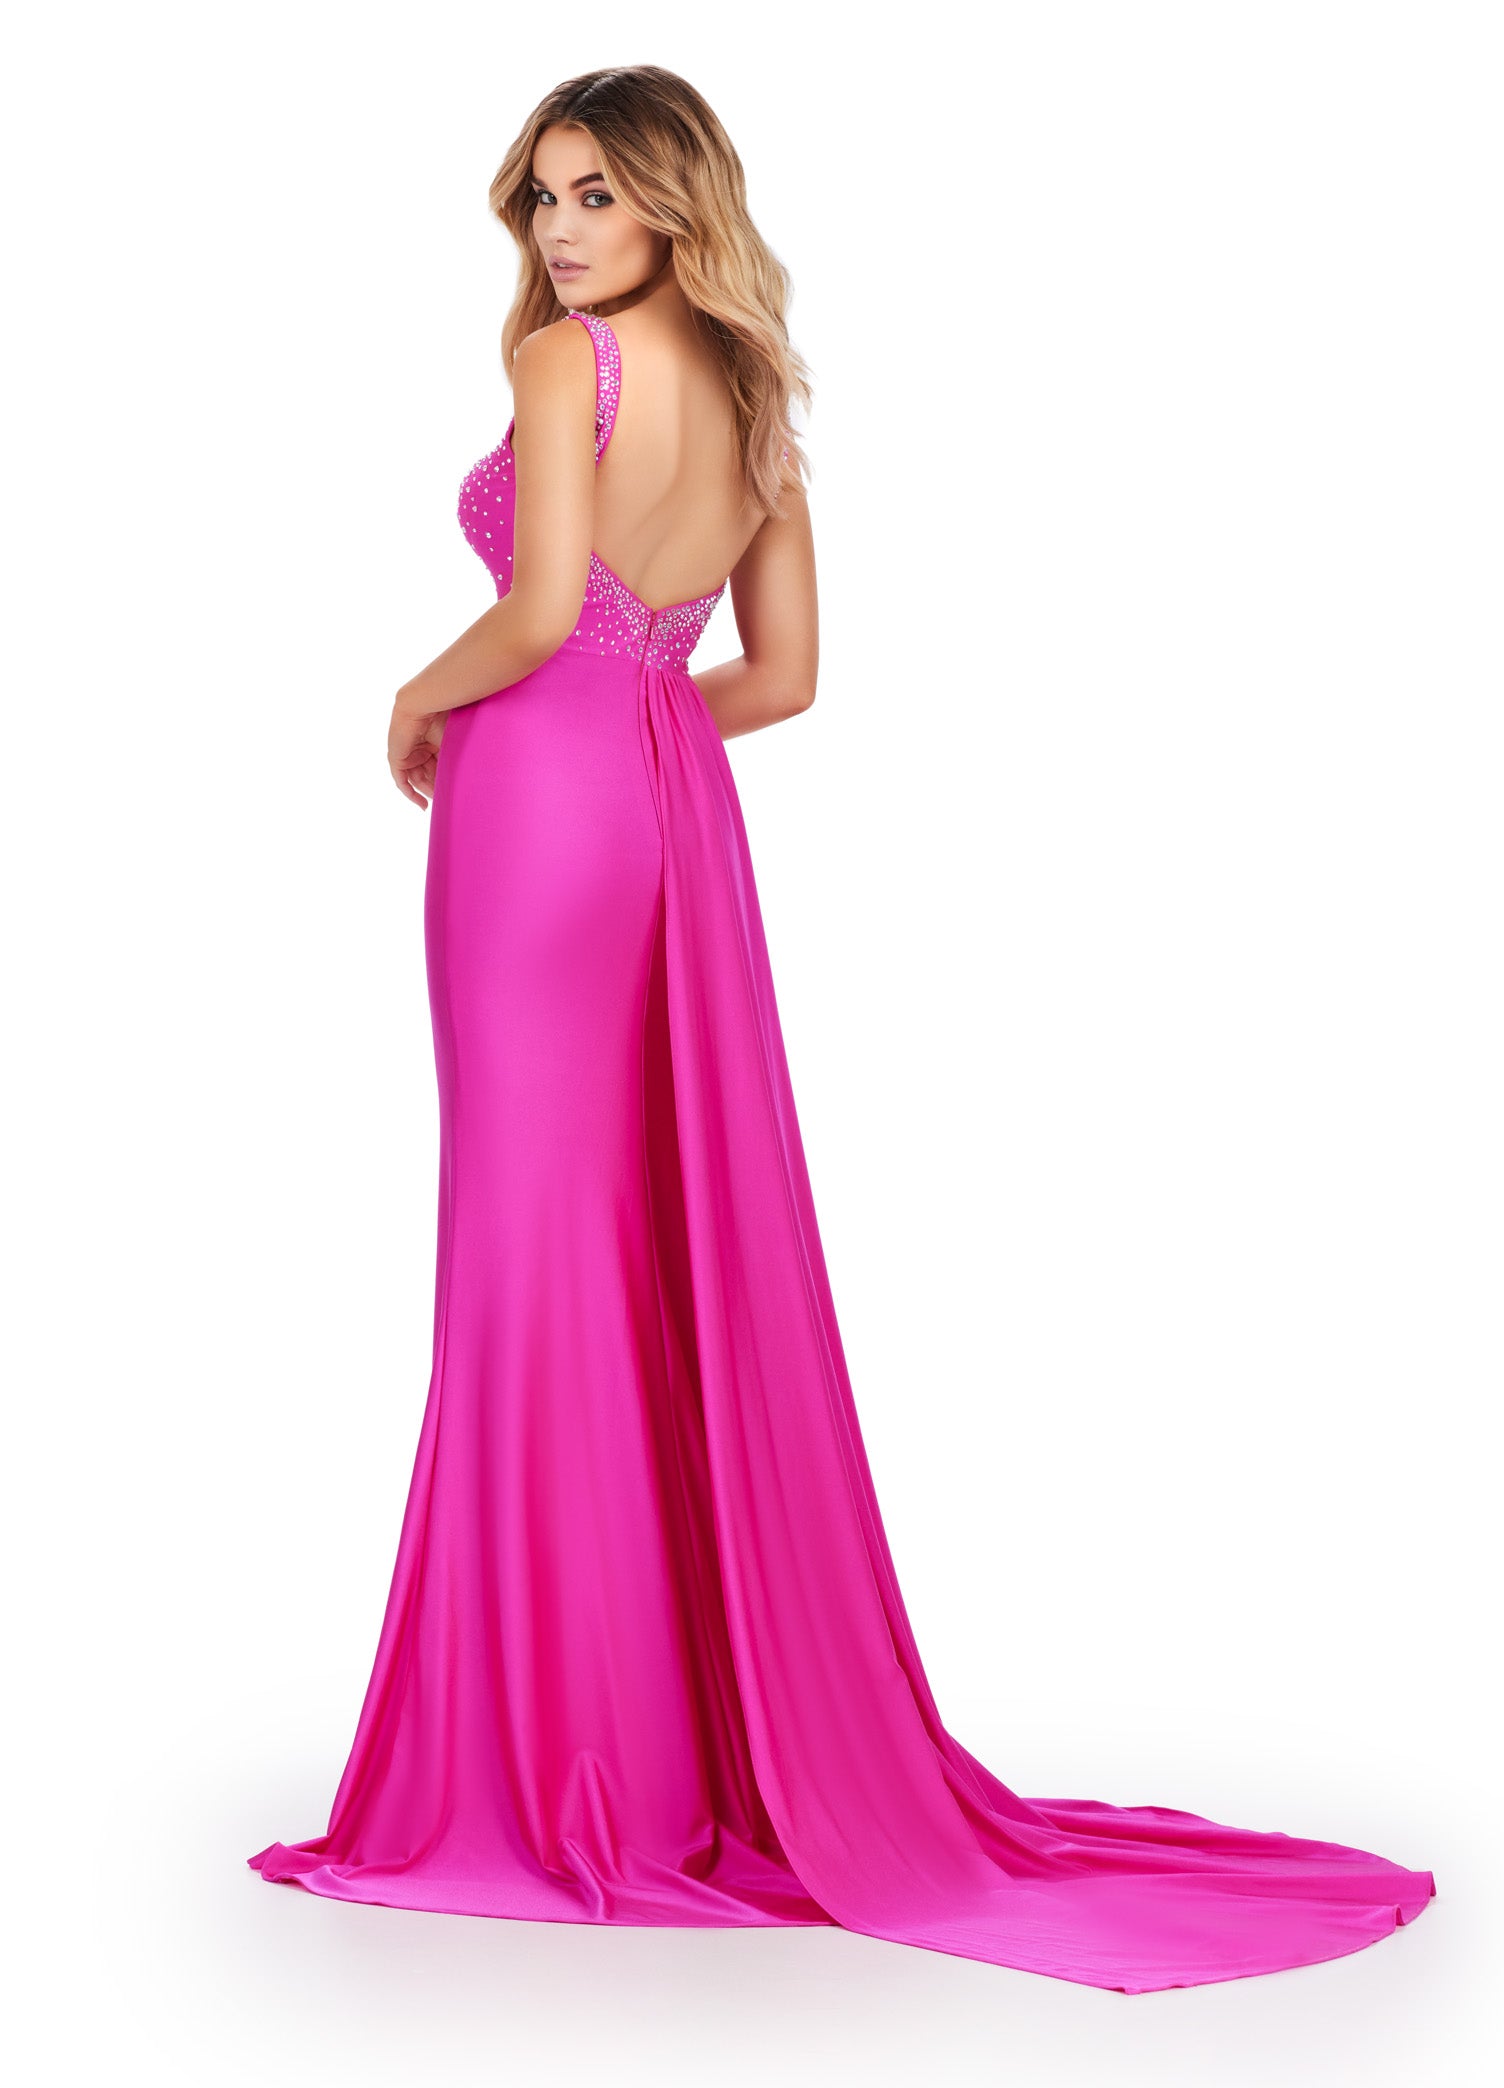 Elevate your formal look with the Ashley Lauren 11579 Long Prom Dress. Made with jersey fabric, this gown features press-on stones and a side skirt slit for added glamour. Perfect for pageants or prom, this dress will make you stand out on any occasion.This unique jersey gown features press on stones and a fabulous side skirt. Perfect for your next event!